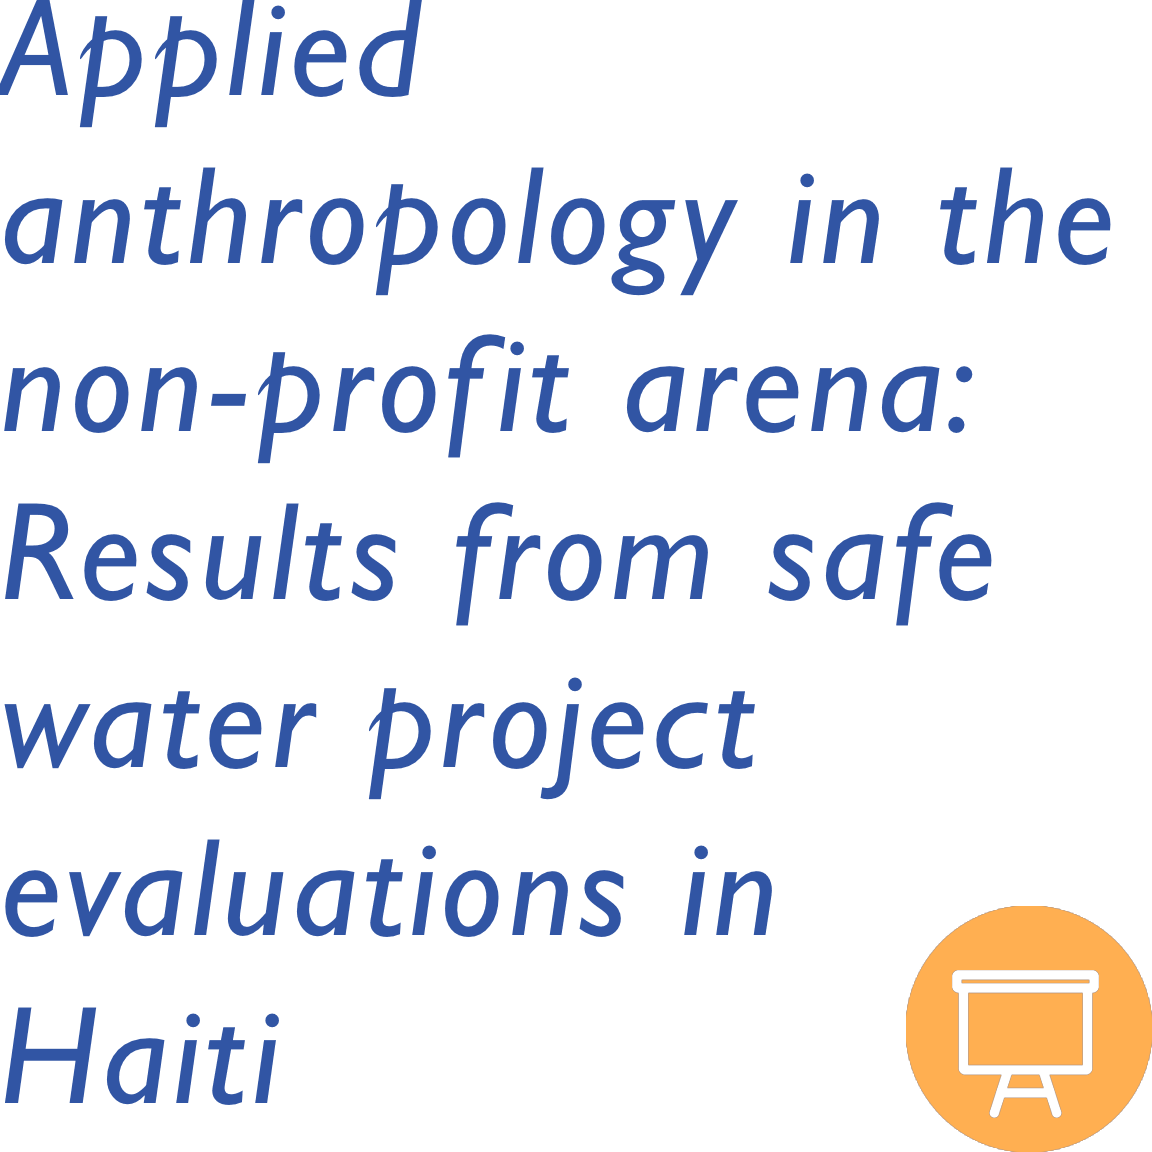 Applied anthropology in the non-profit arena: Results from safe water project evaluations in Haiti 